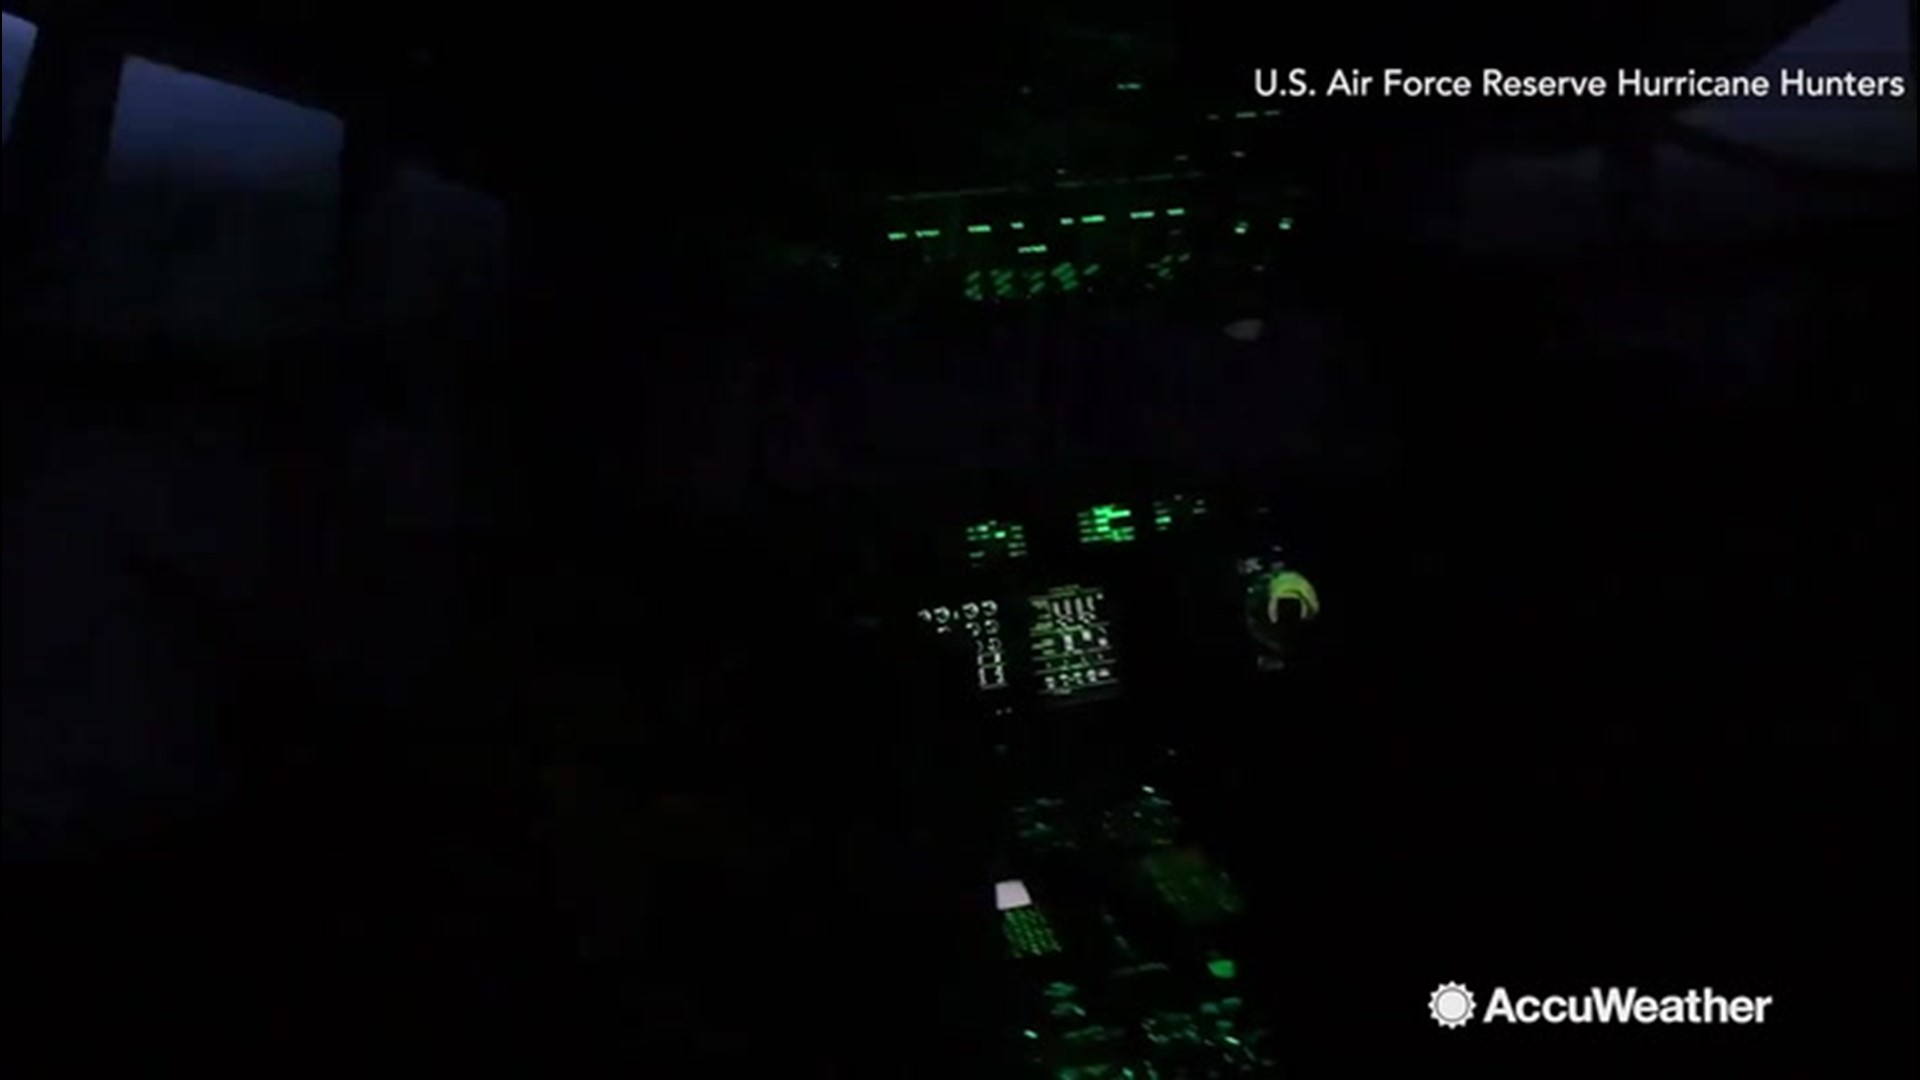 The U.S. Air Force Reserve Hurricane Hunters flew through Hurricane Dorian on Sept. 1, while flying over the Atlantic Ocean.